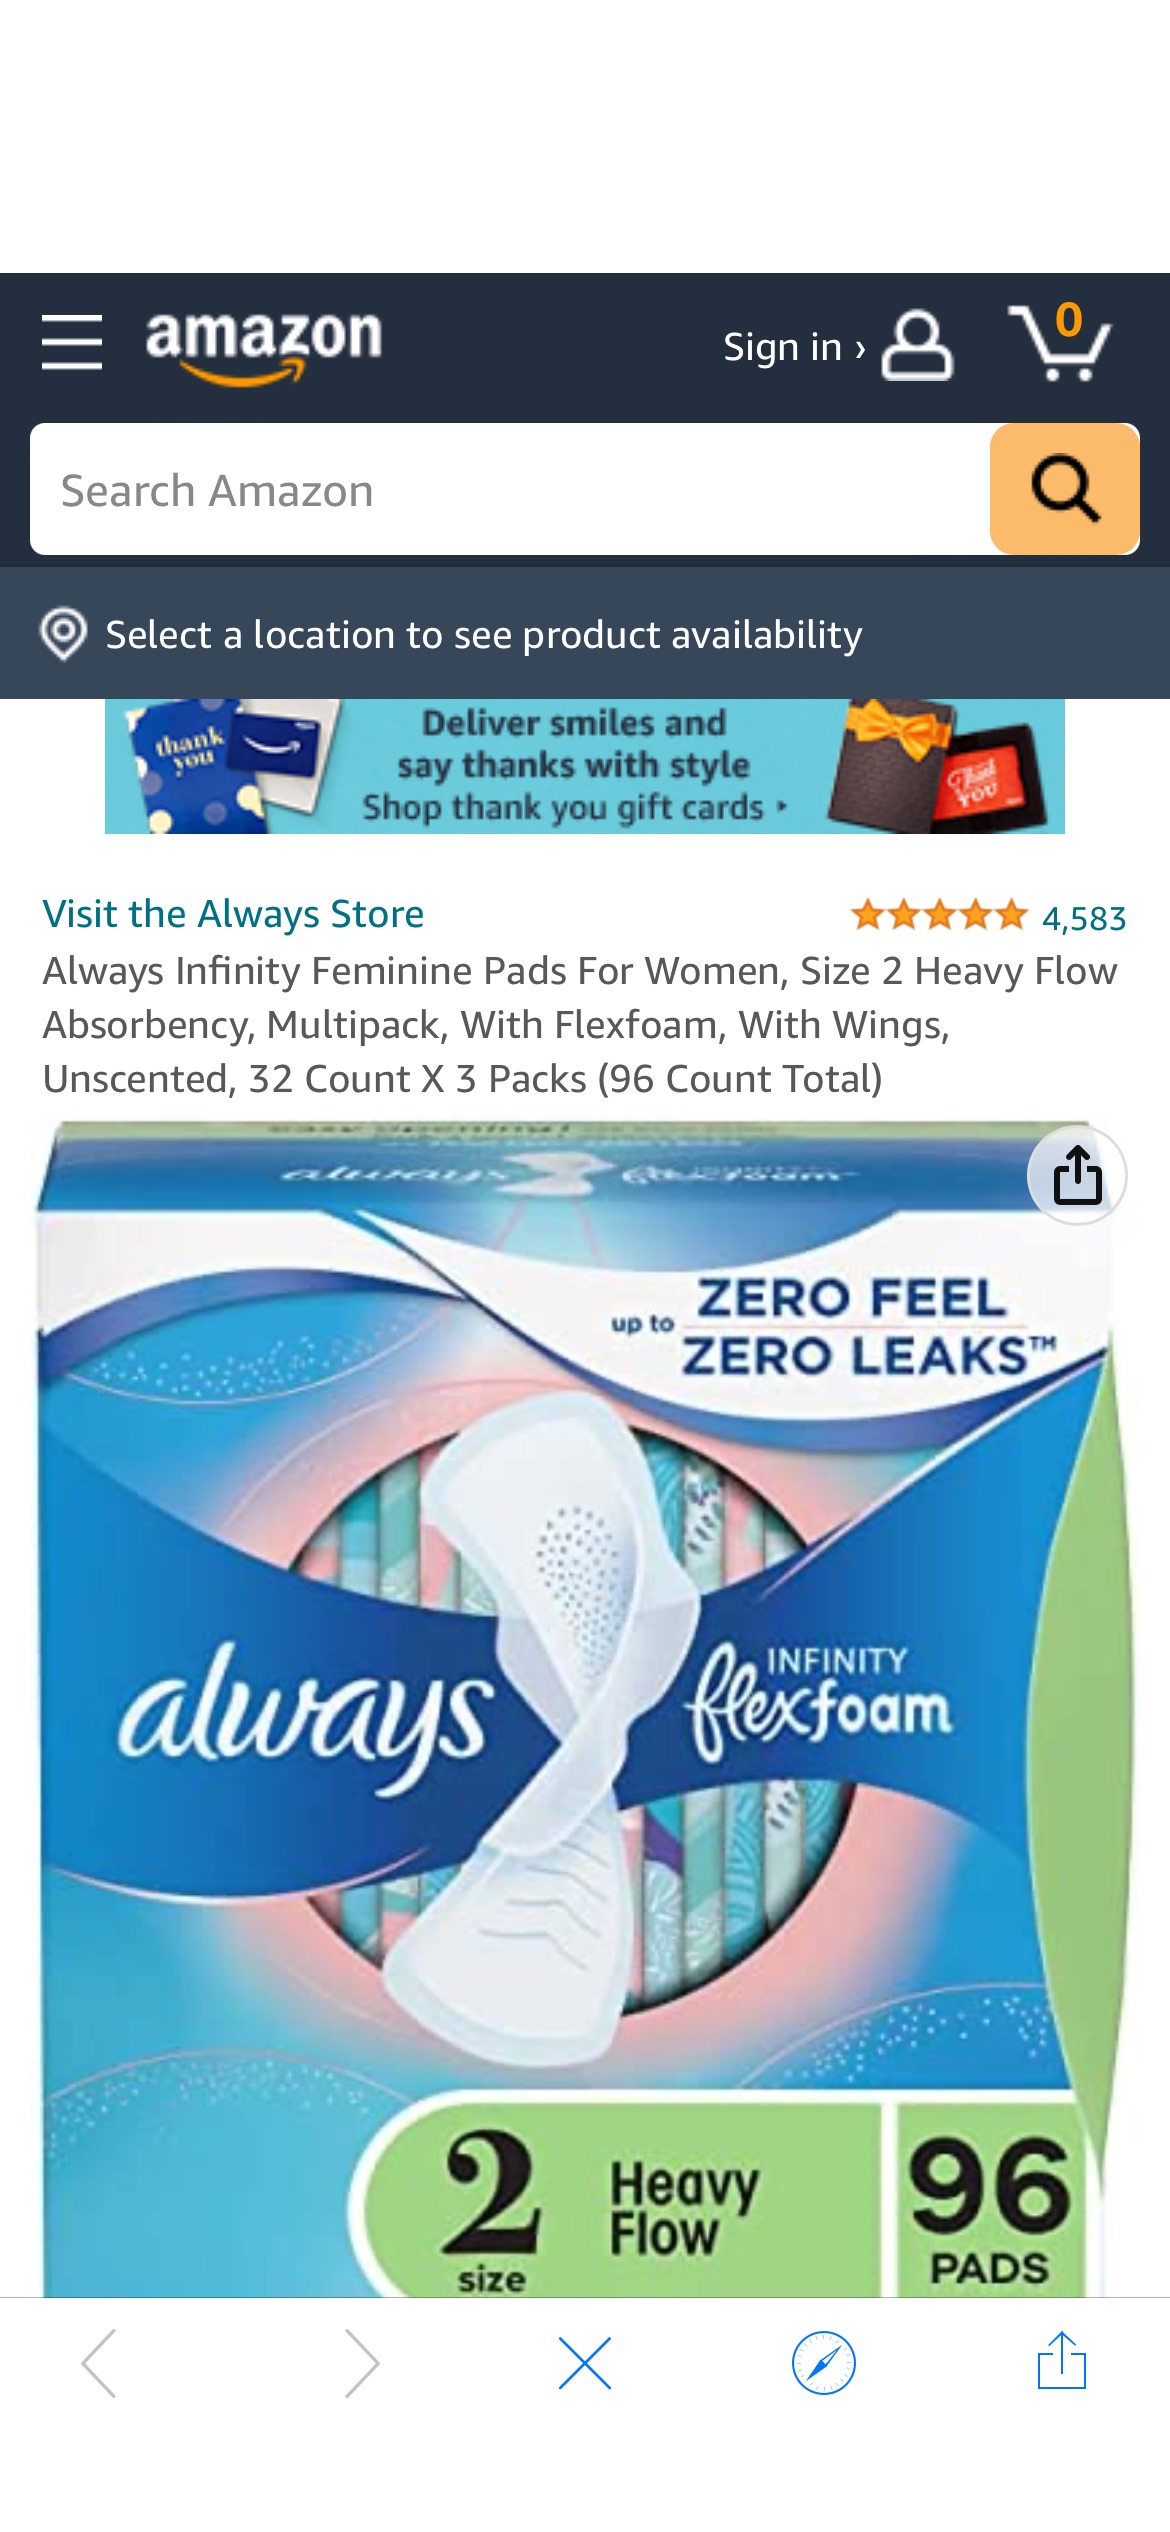 Amazon.com: Always Infinity Feminine Pads For Women, Size 2 Heavy Flow Absorbency, Multipack, With Flexfoam, With Wings, Unscented, 32 Count X 3 Packs (96 Count Total) : Health & Household